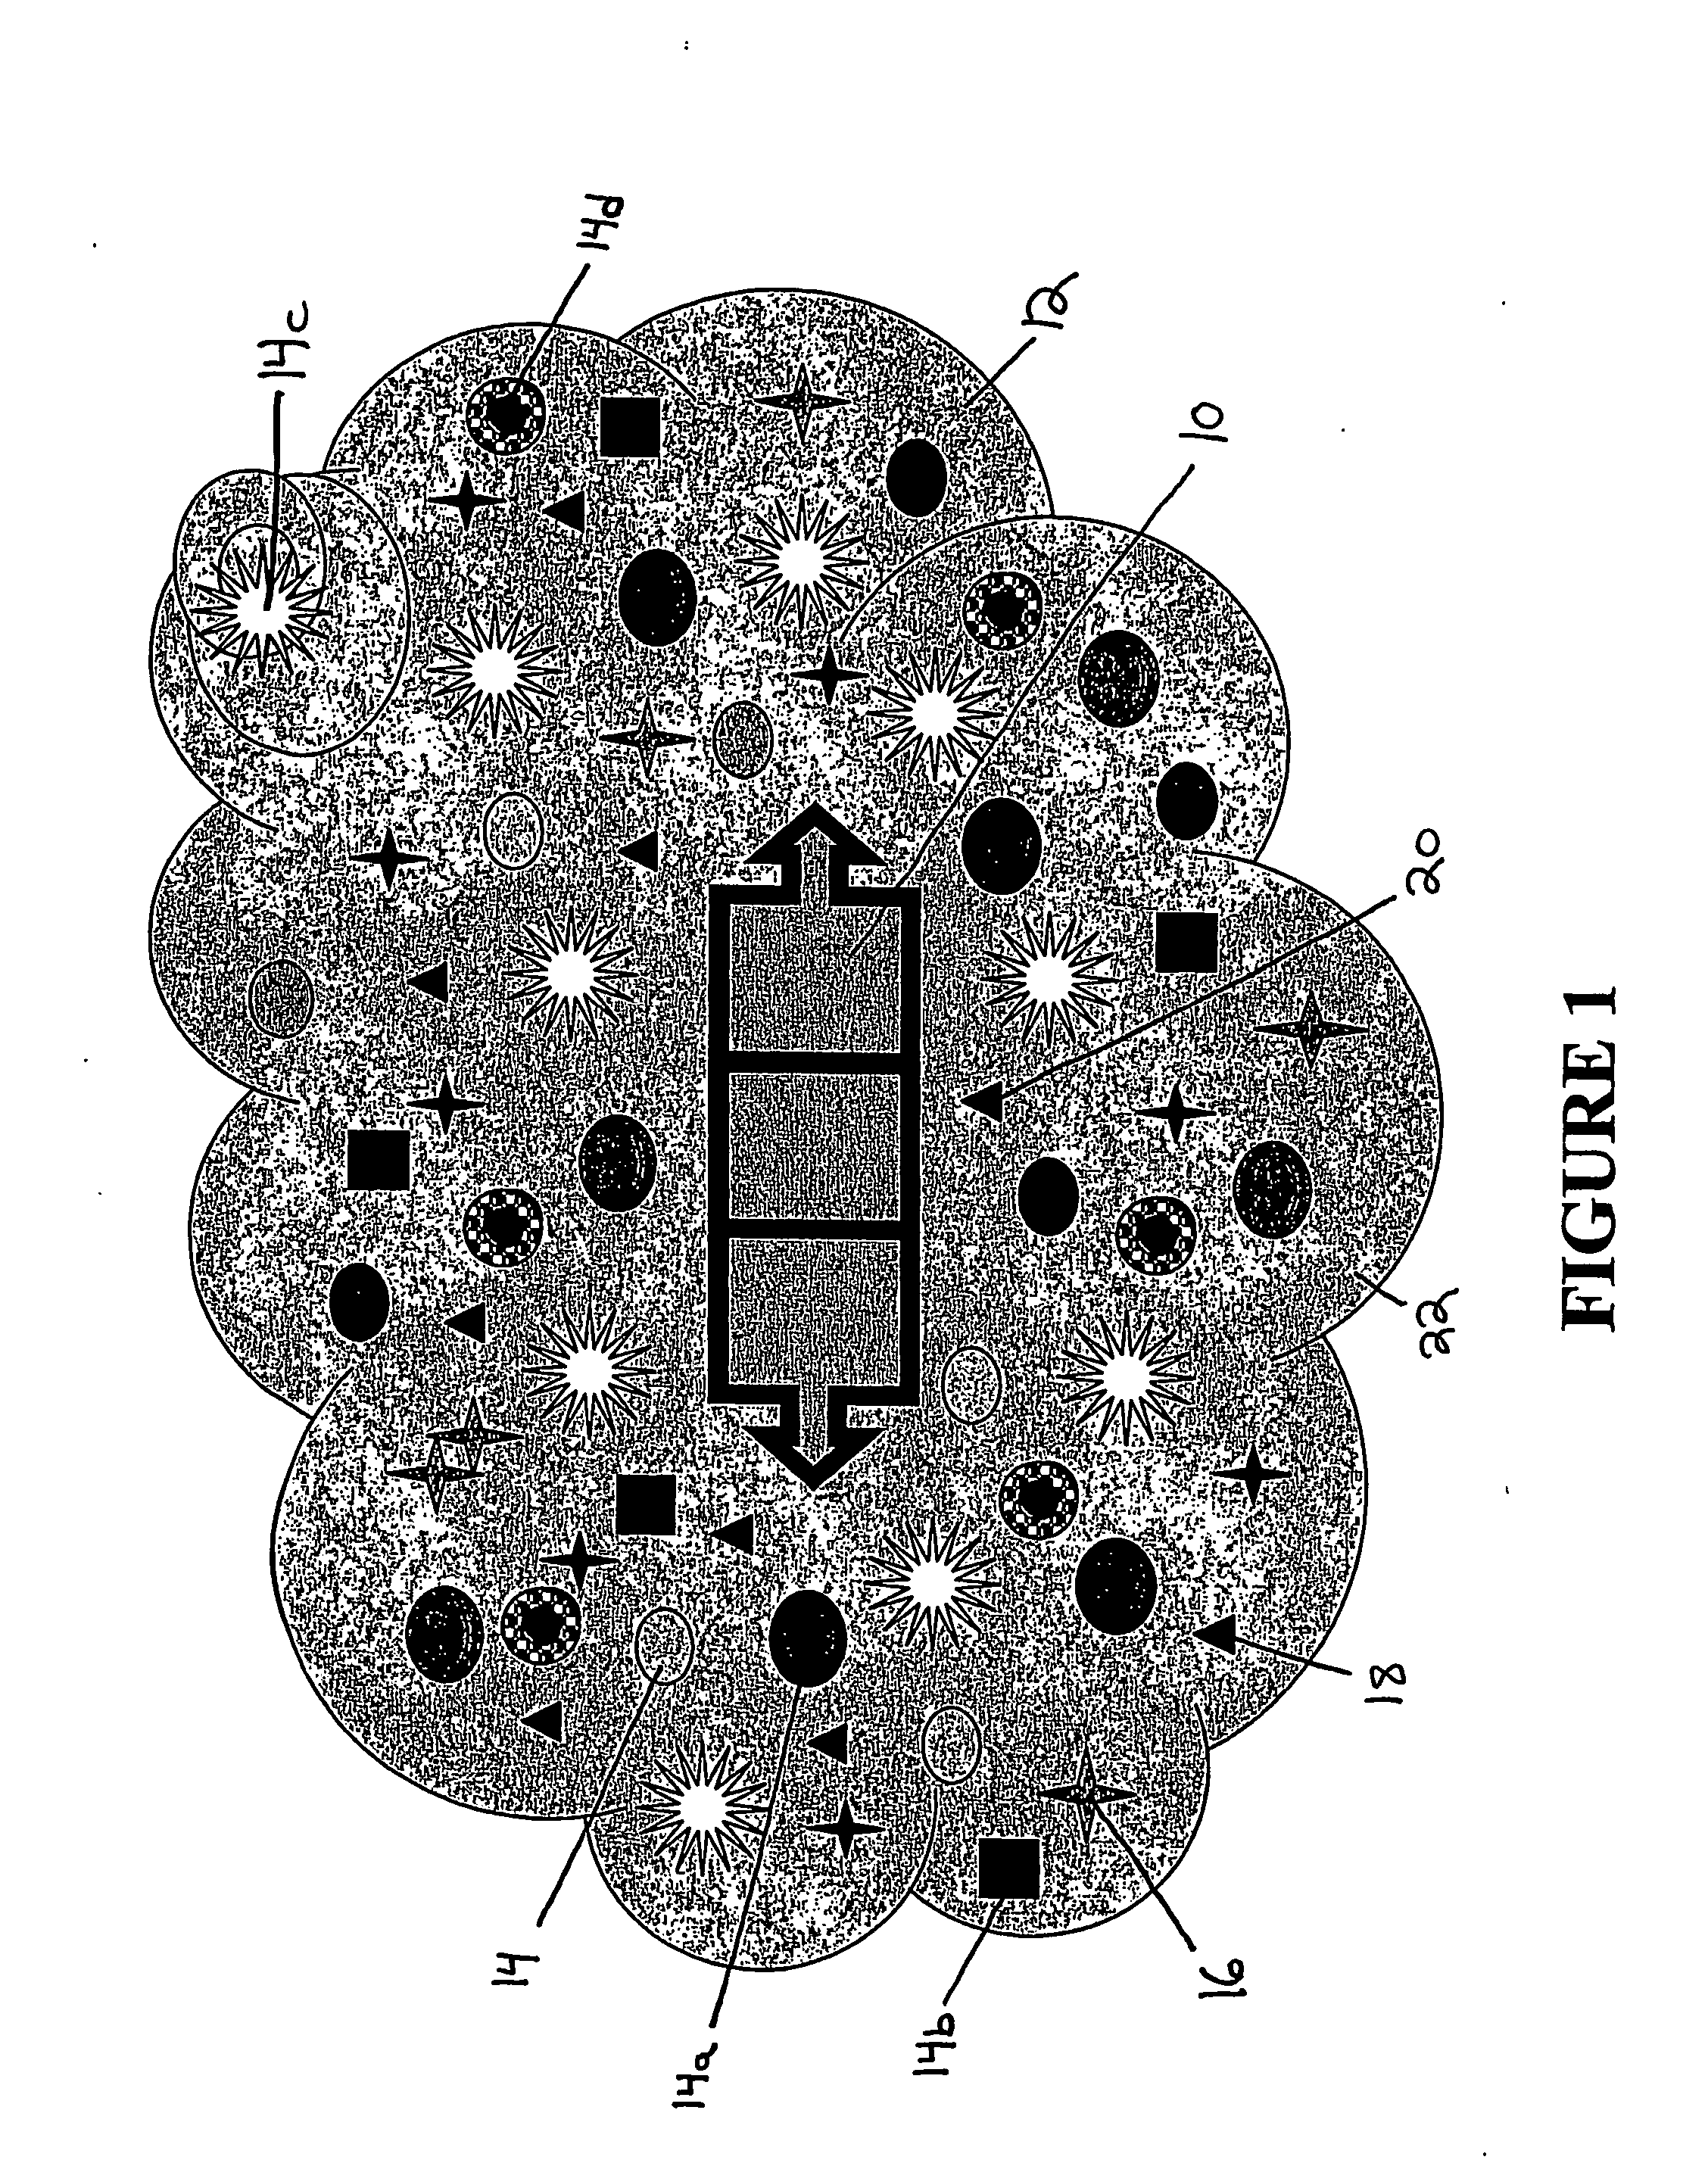 Article tissue systems and uses thereof